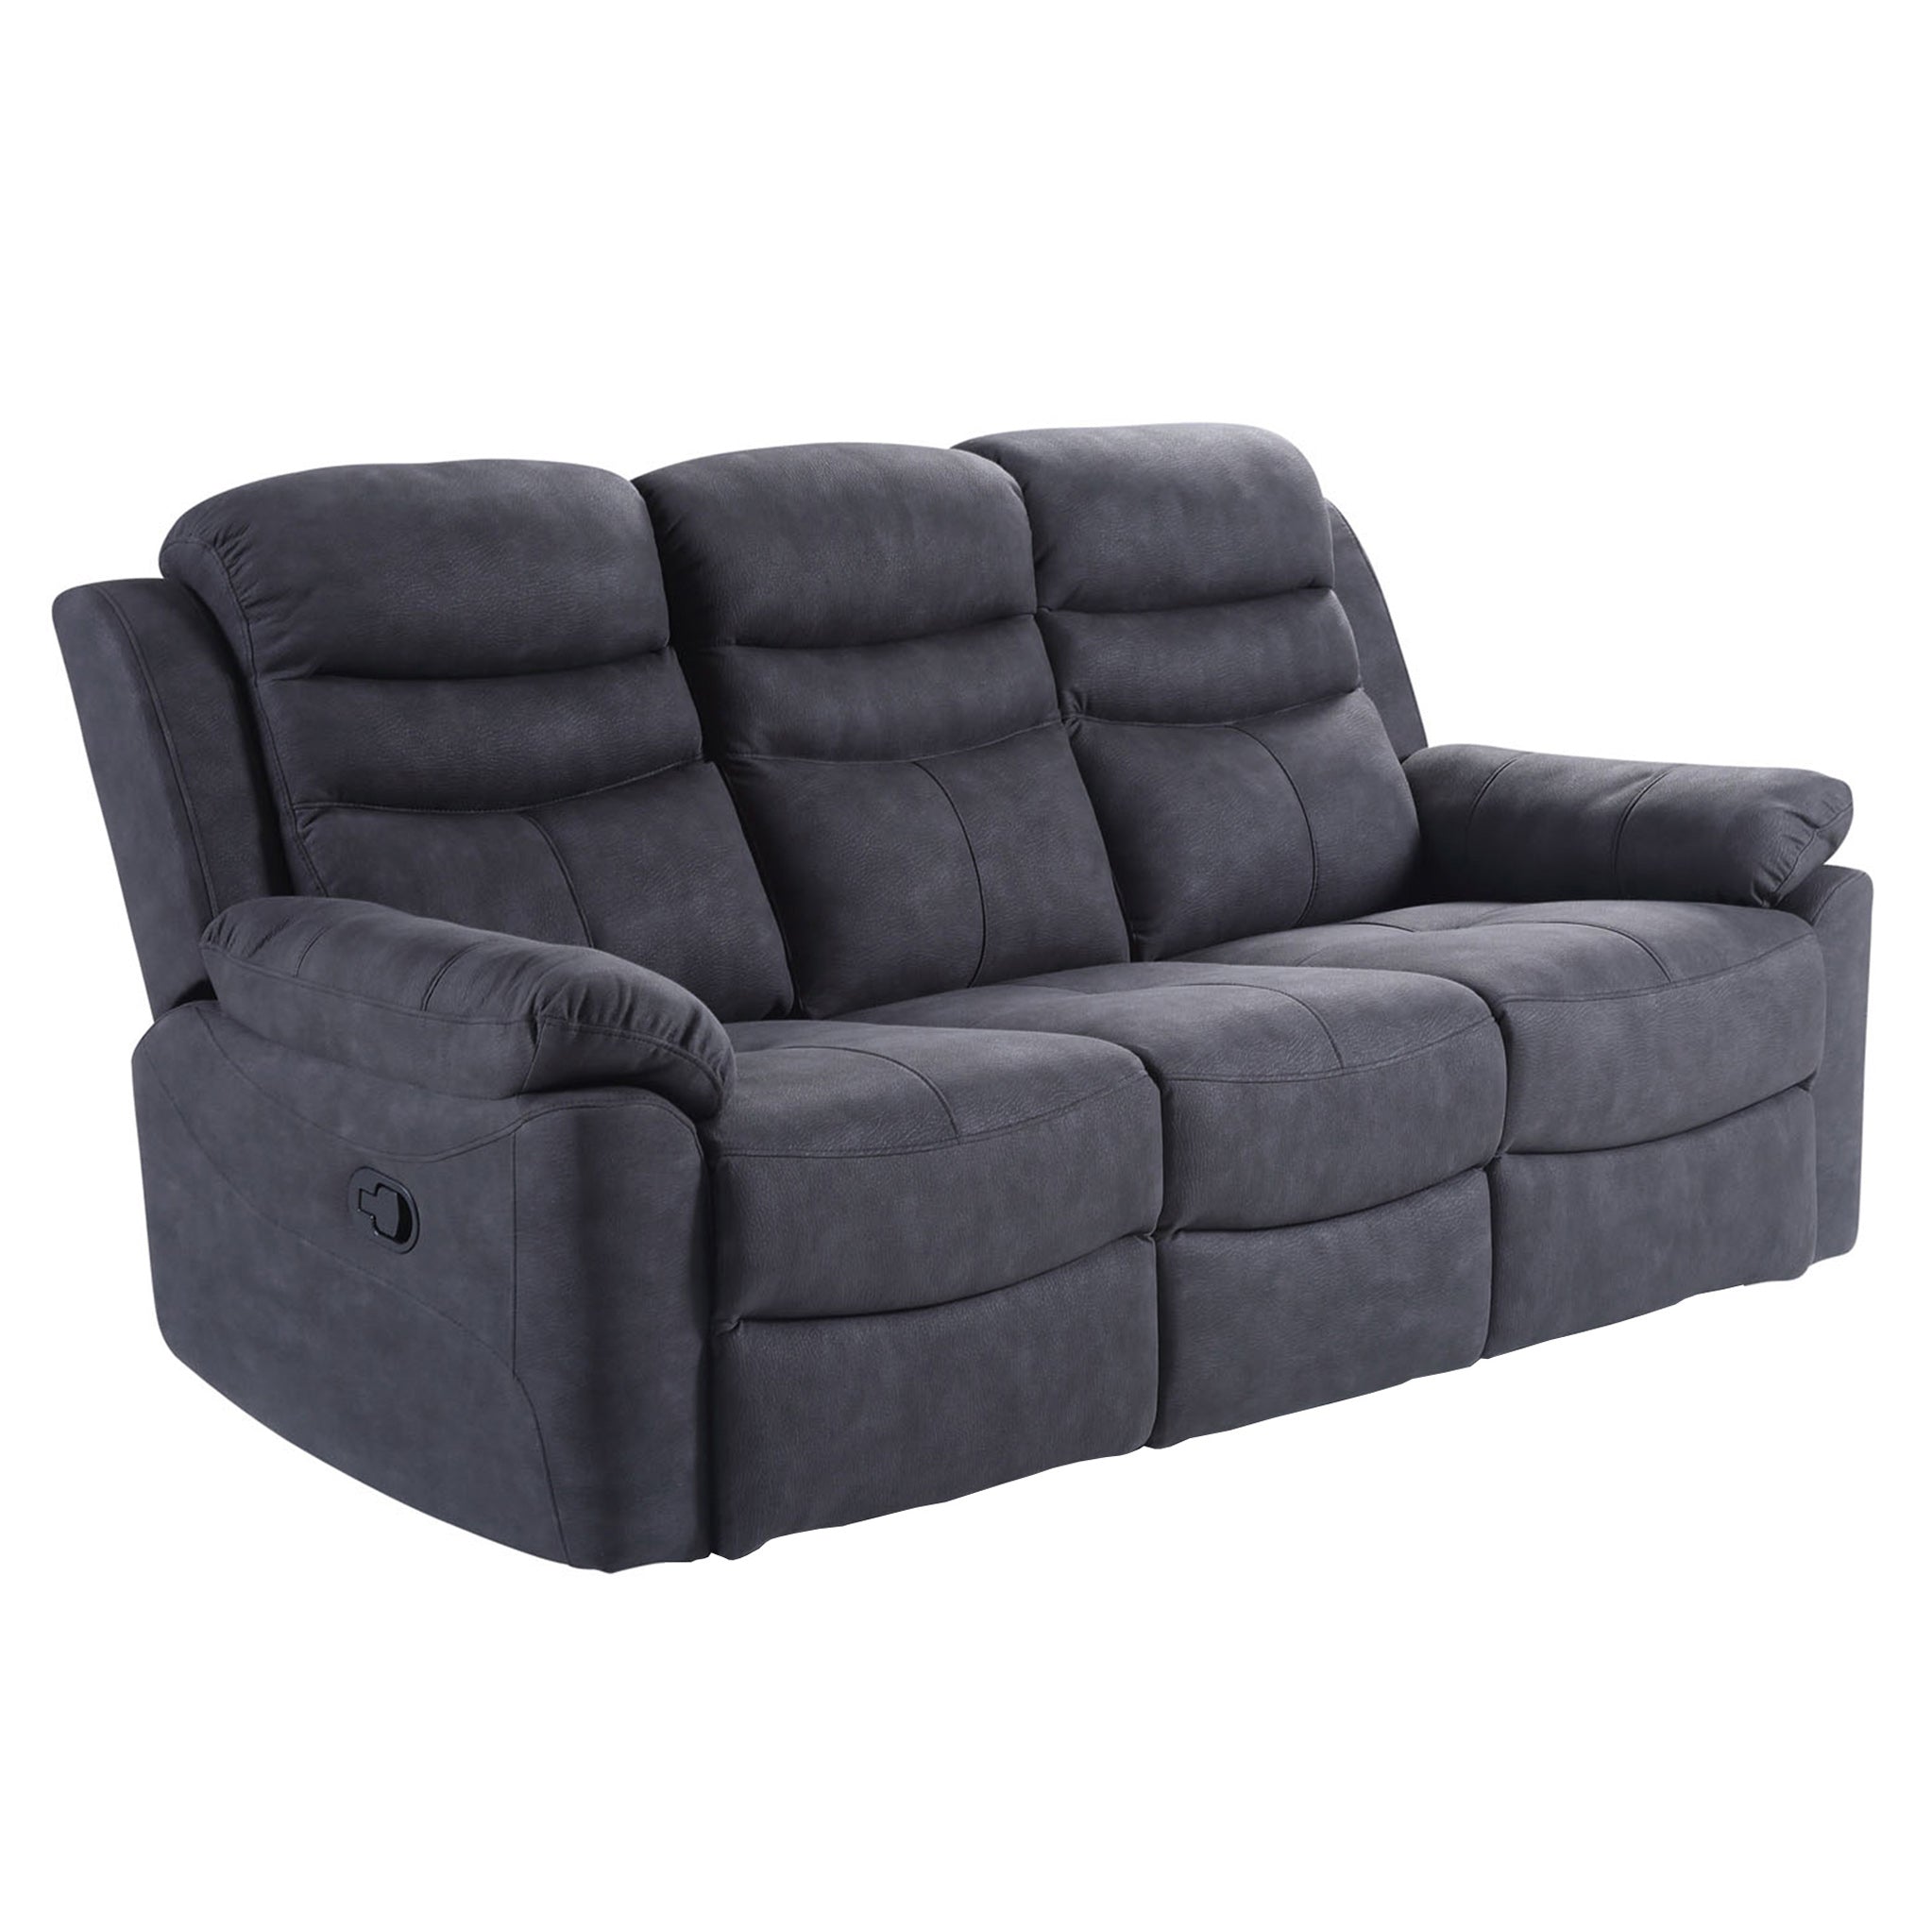 Conway 3 Seater Recliner Sofa Charcoal Roseland